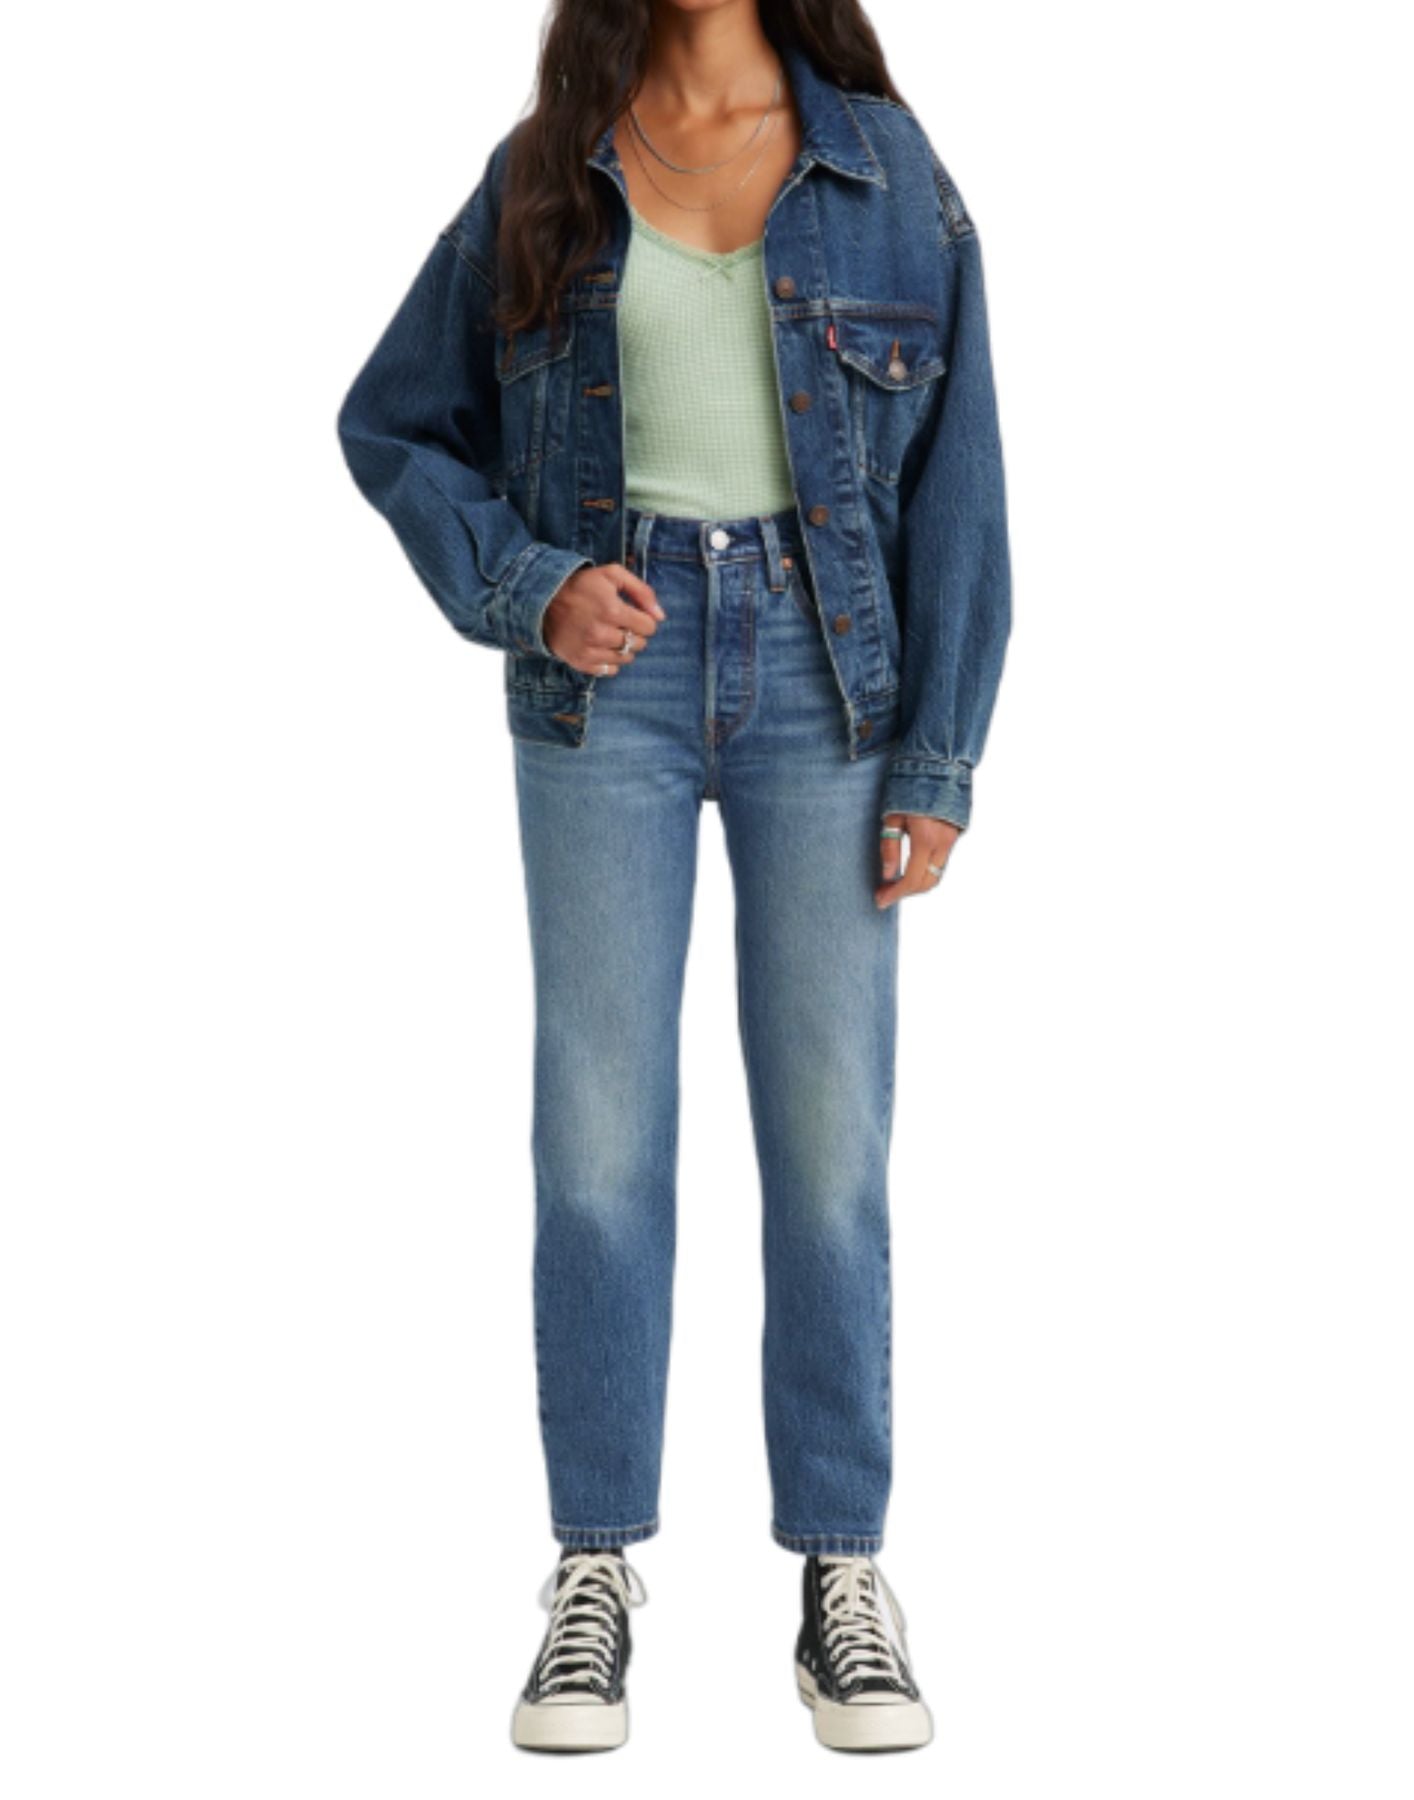 Jeans para mujer 362000291 Levi's